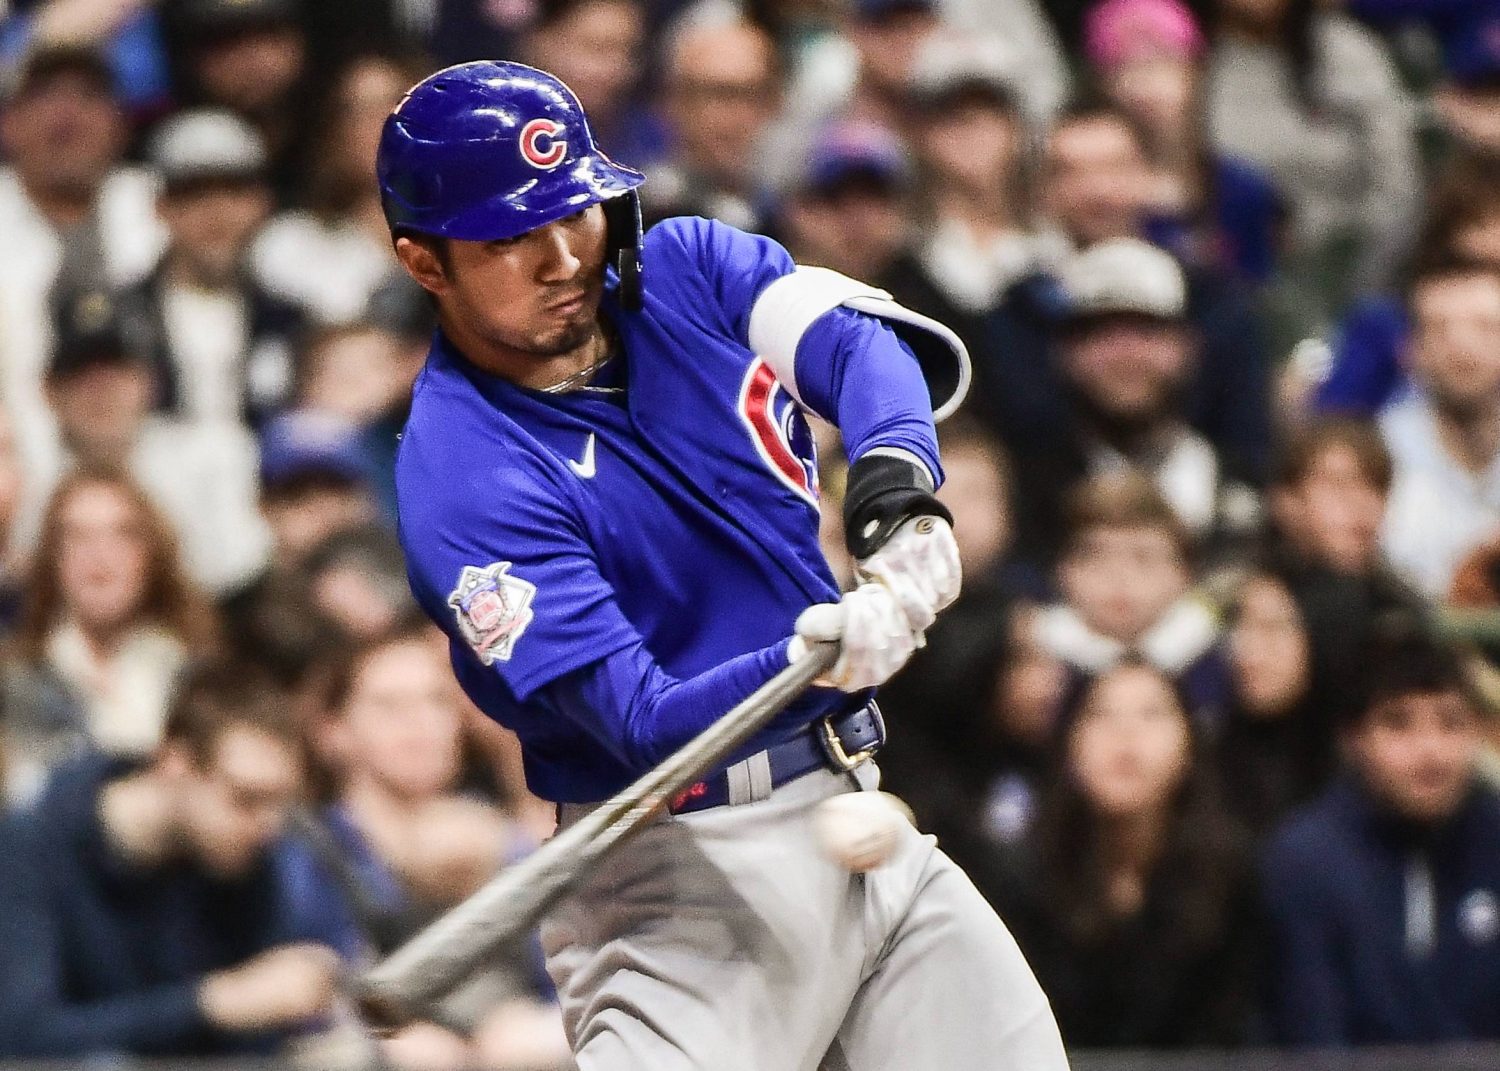 Cubs Outfielder Seiya Suzuki Named NL Rookie of the Month for April